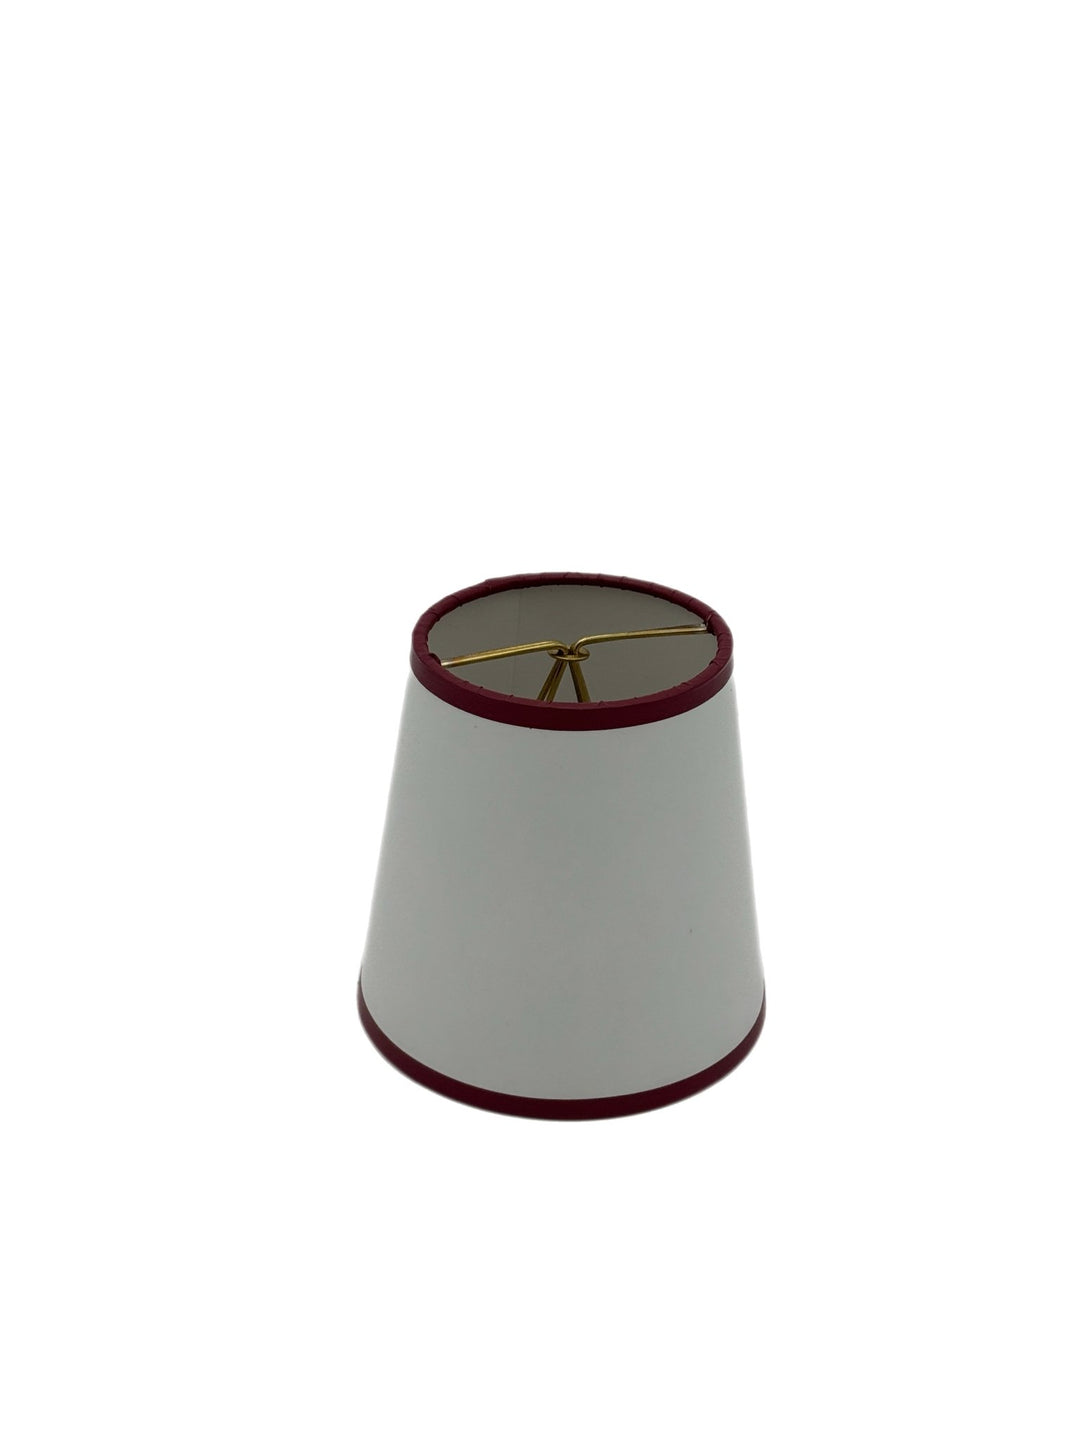 4.5" White Paper with Cranberry Trim - (4) shades in stock - Lux Lamp Shades